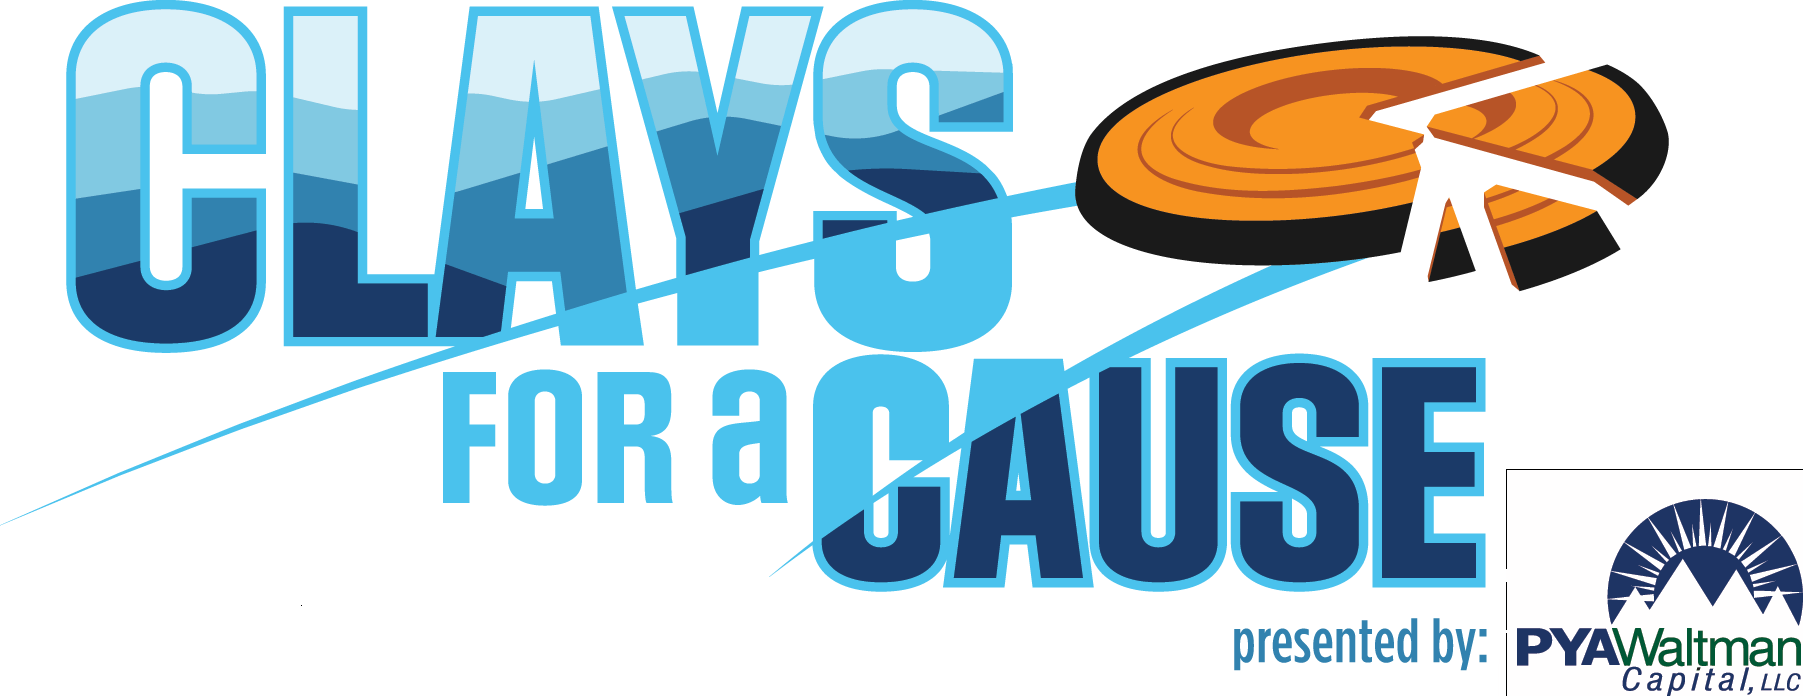 Clays for a Cause